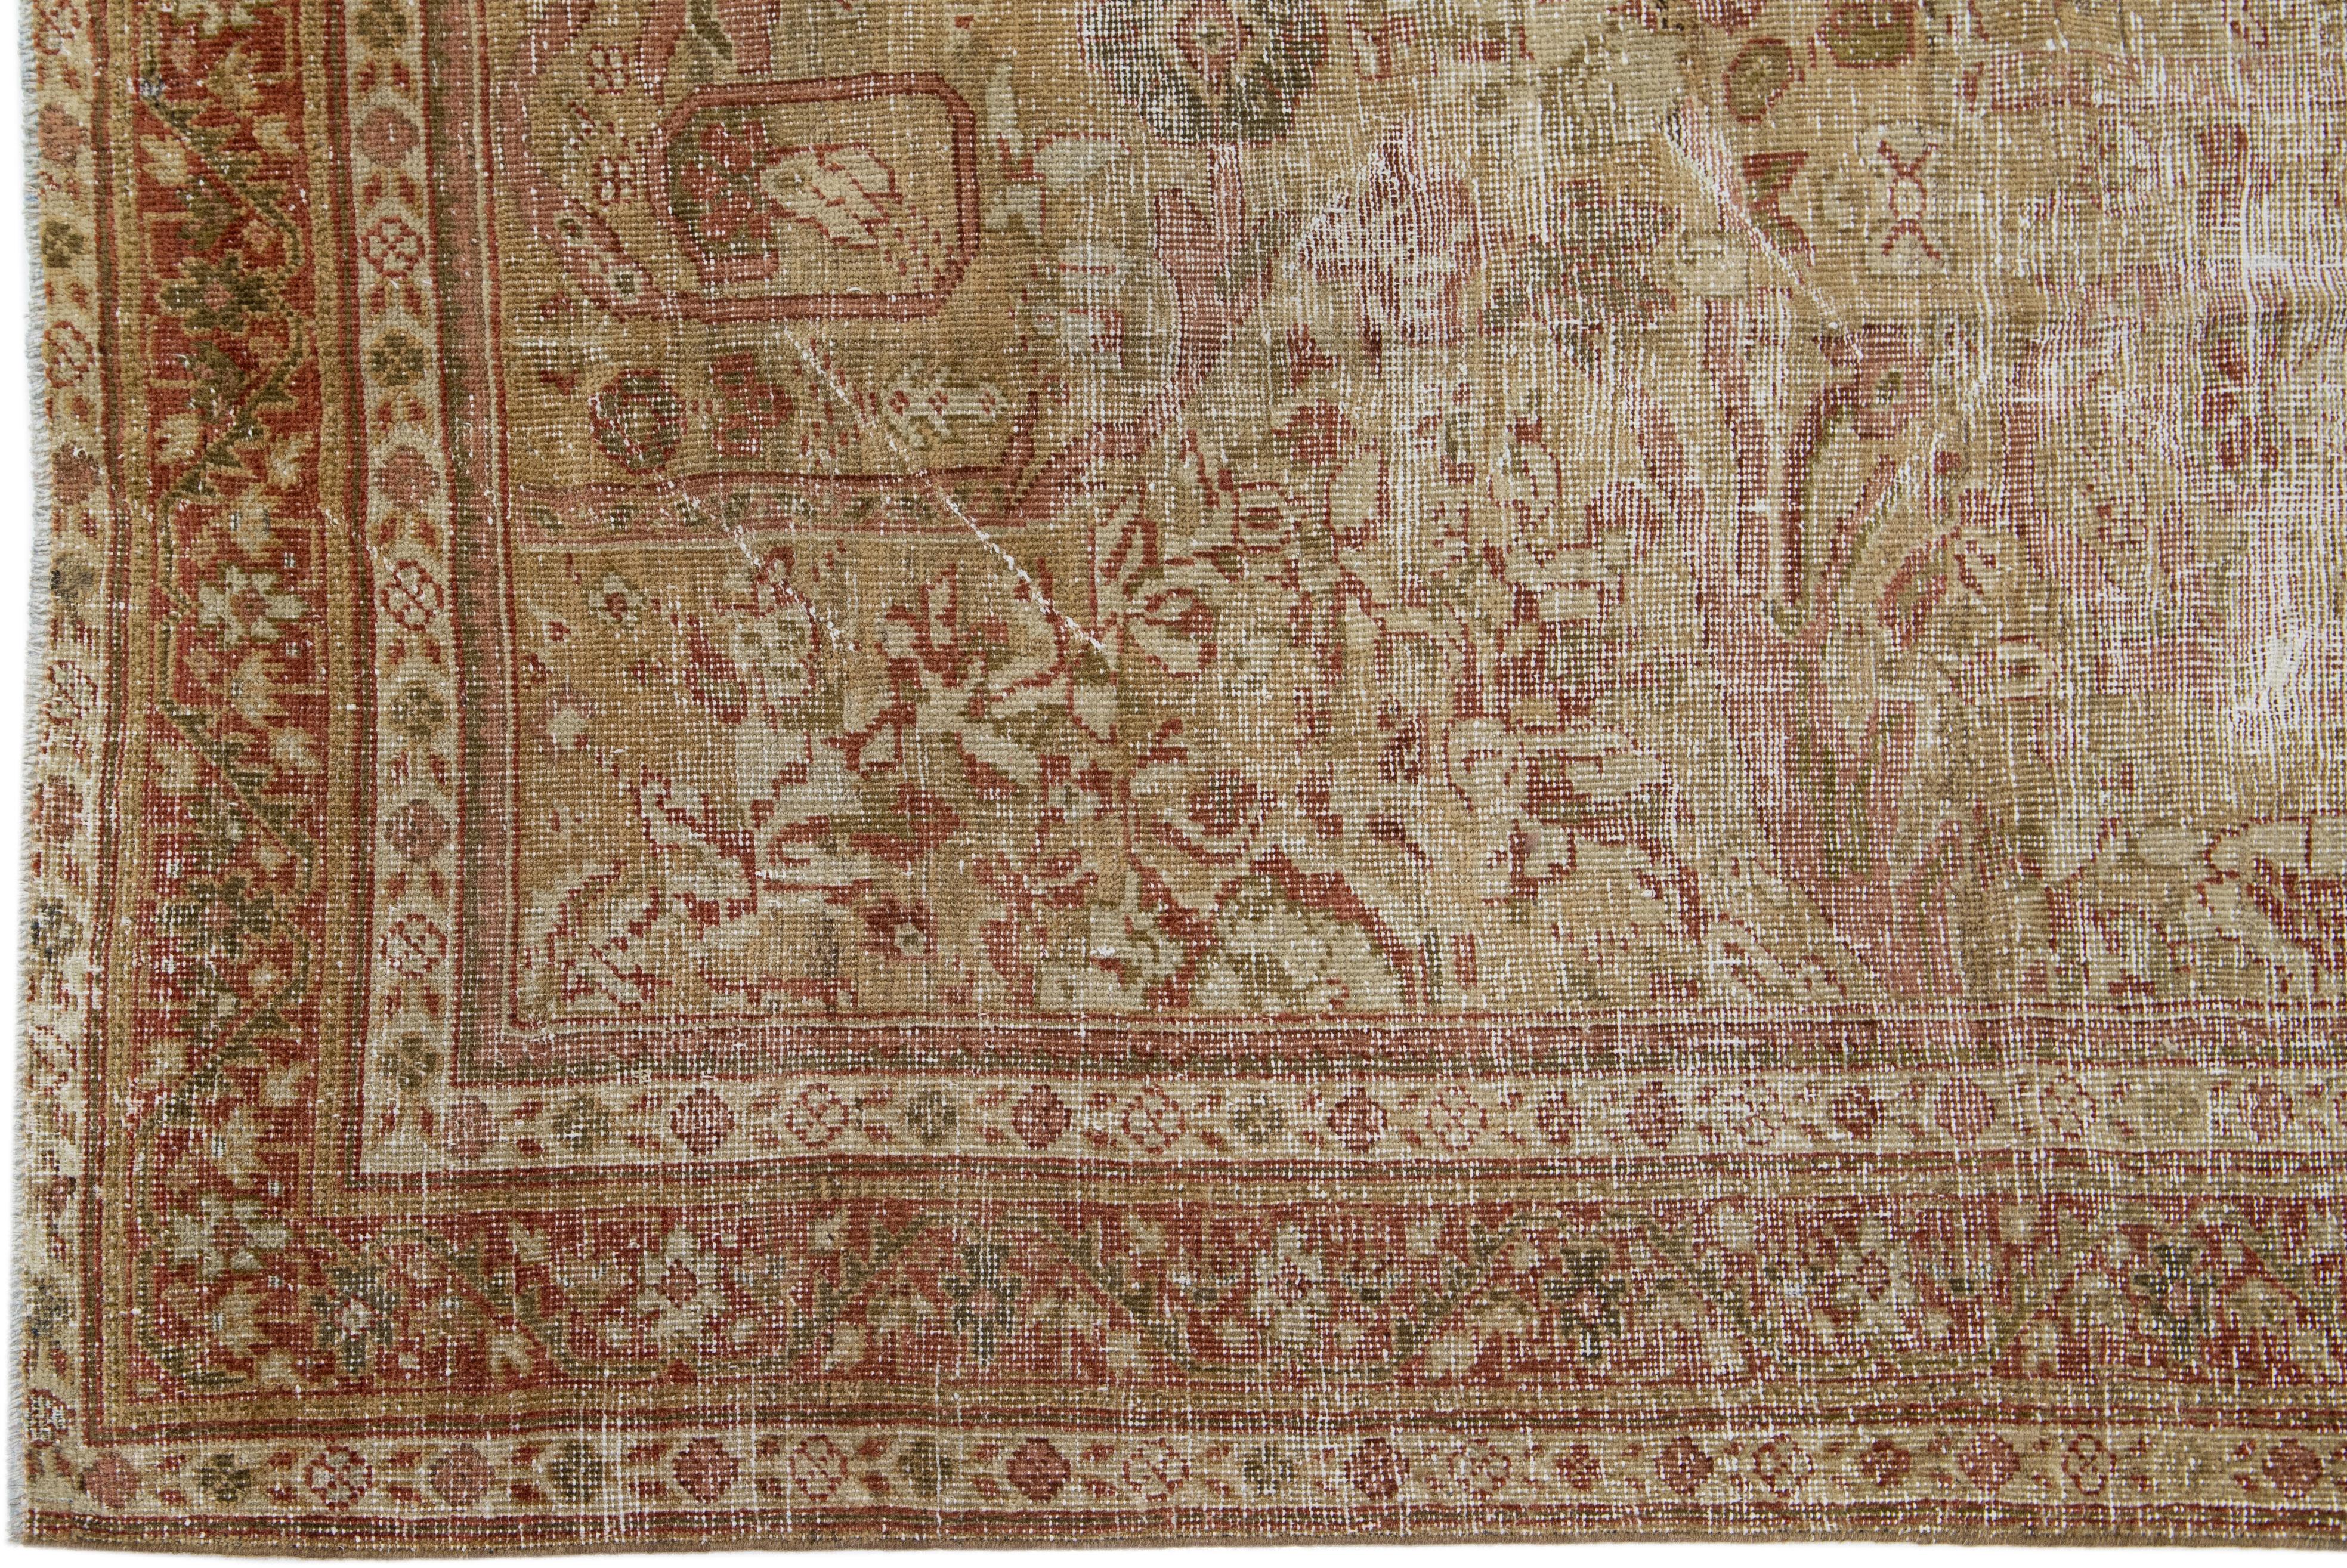 Allover Floral Handmade Antique Persian Malayer Gallery Wool Rug in Rust In Good Condition For Sale In Norwalk, CT